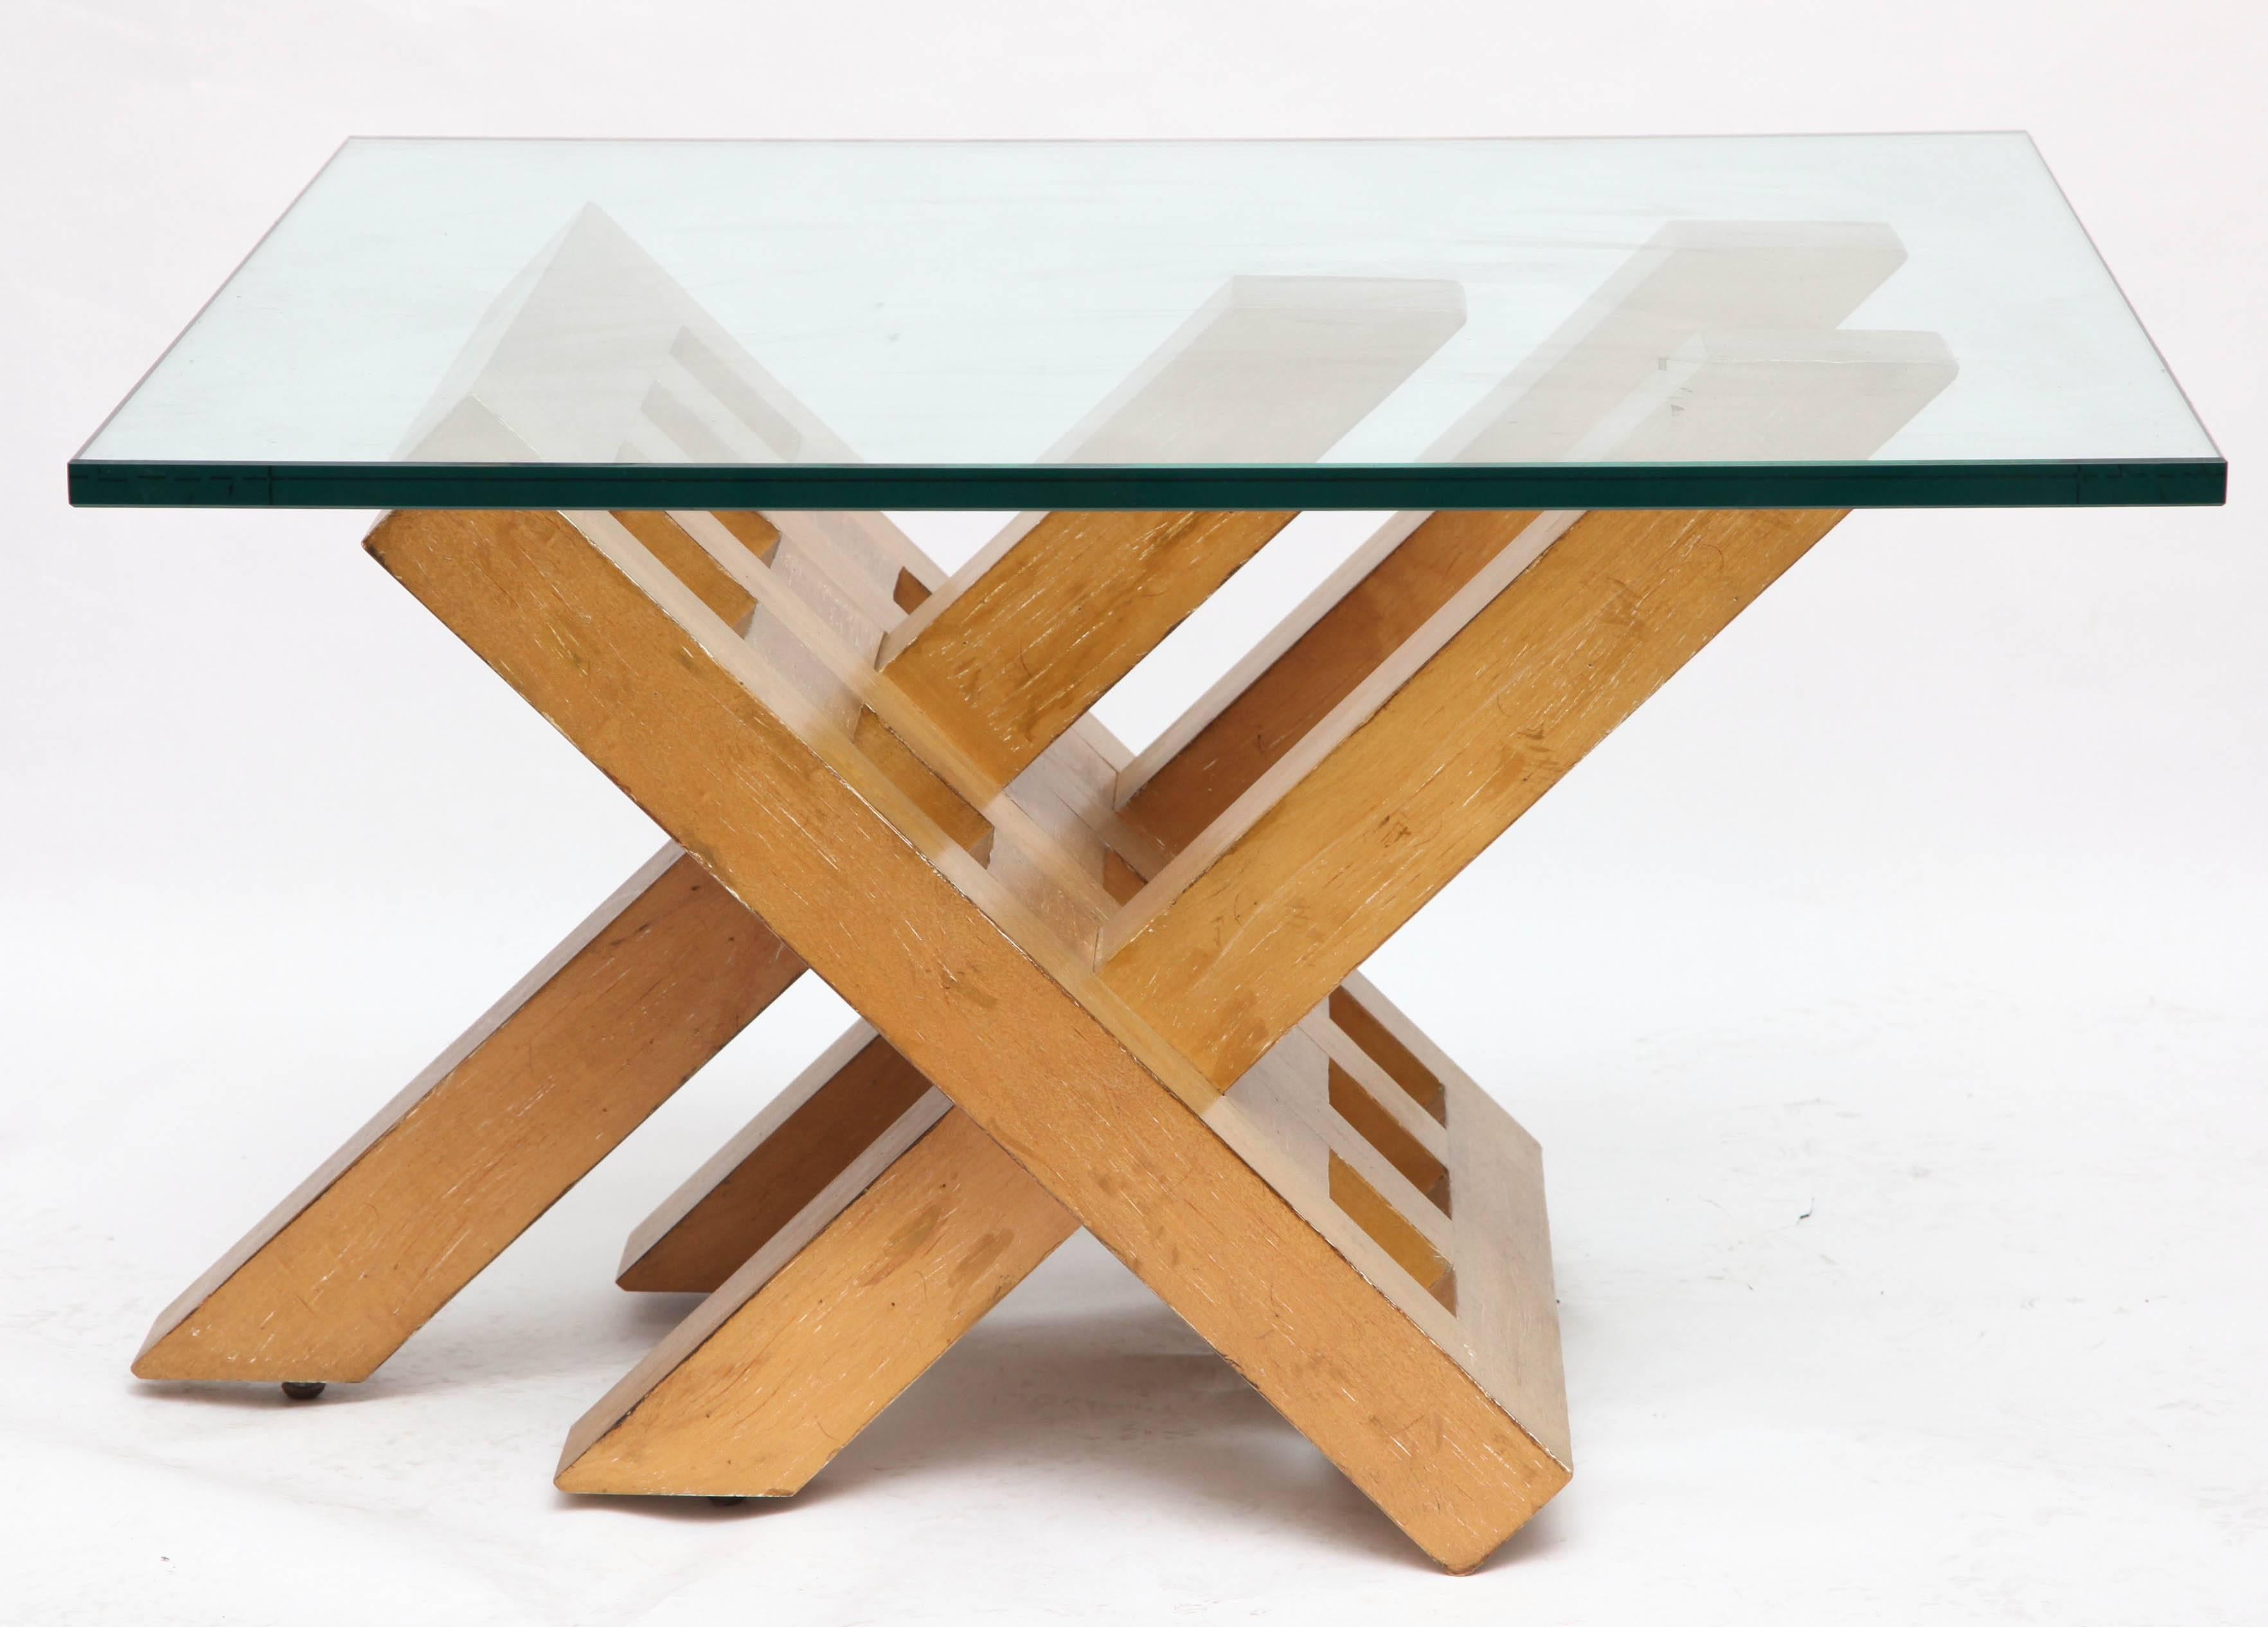 A 1940s art modern architectural wood and glass table.